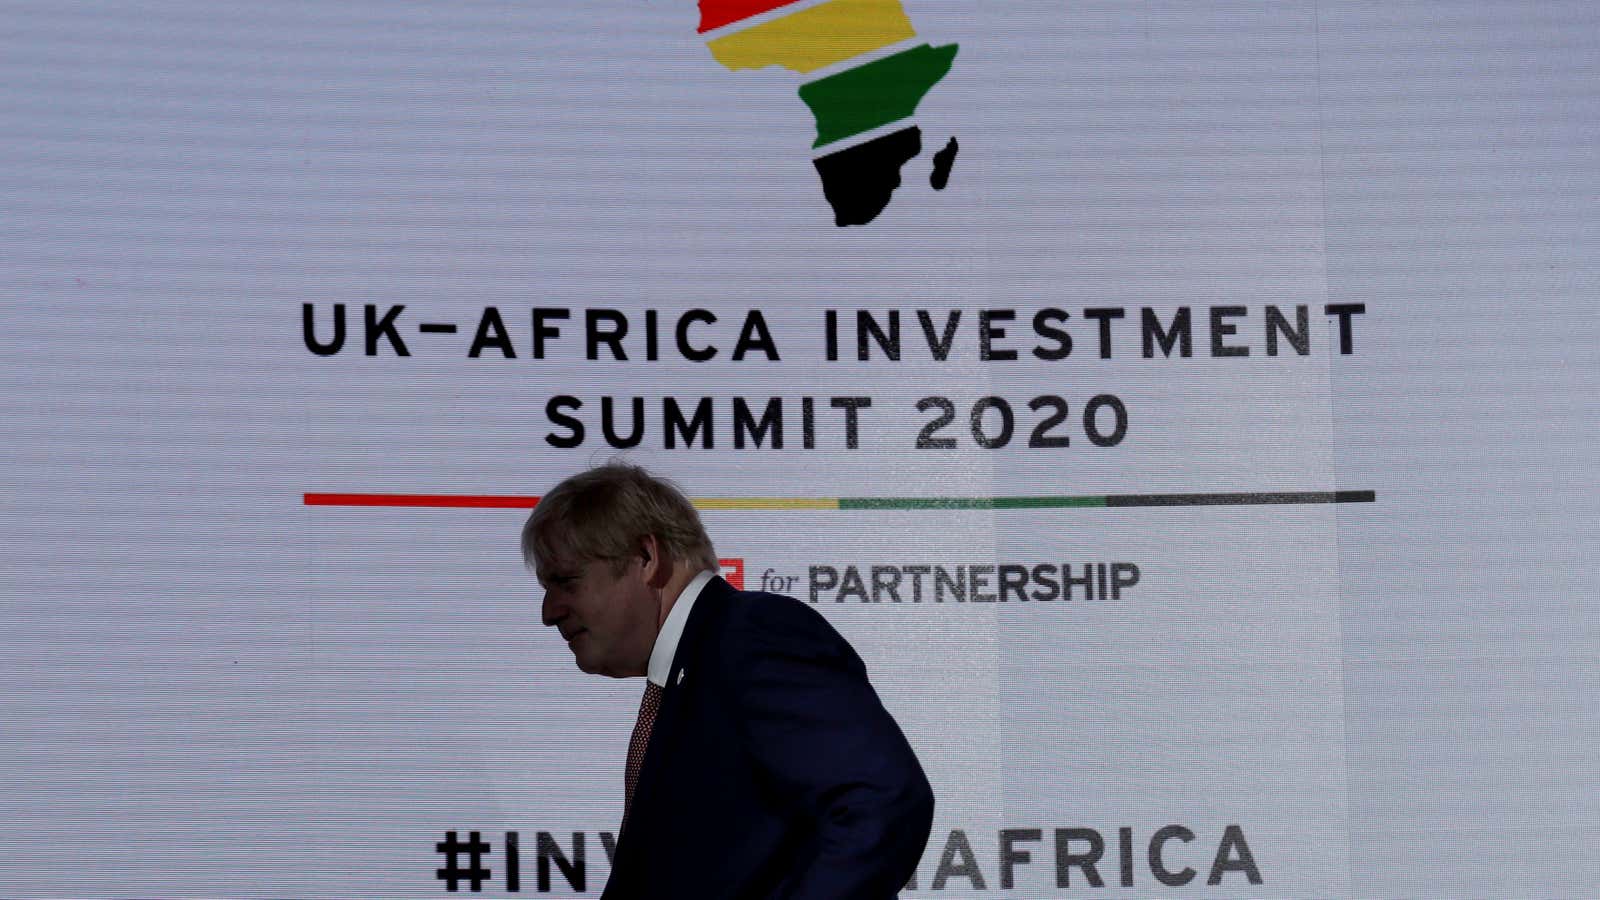 Hello and goodbye? Britain’s prime Minister Boris Johnson walks off stage at UK-Africa Investment Summit in London, Britain Jan. 20, 2020.